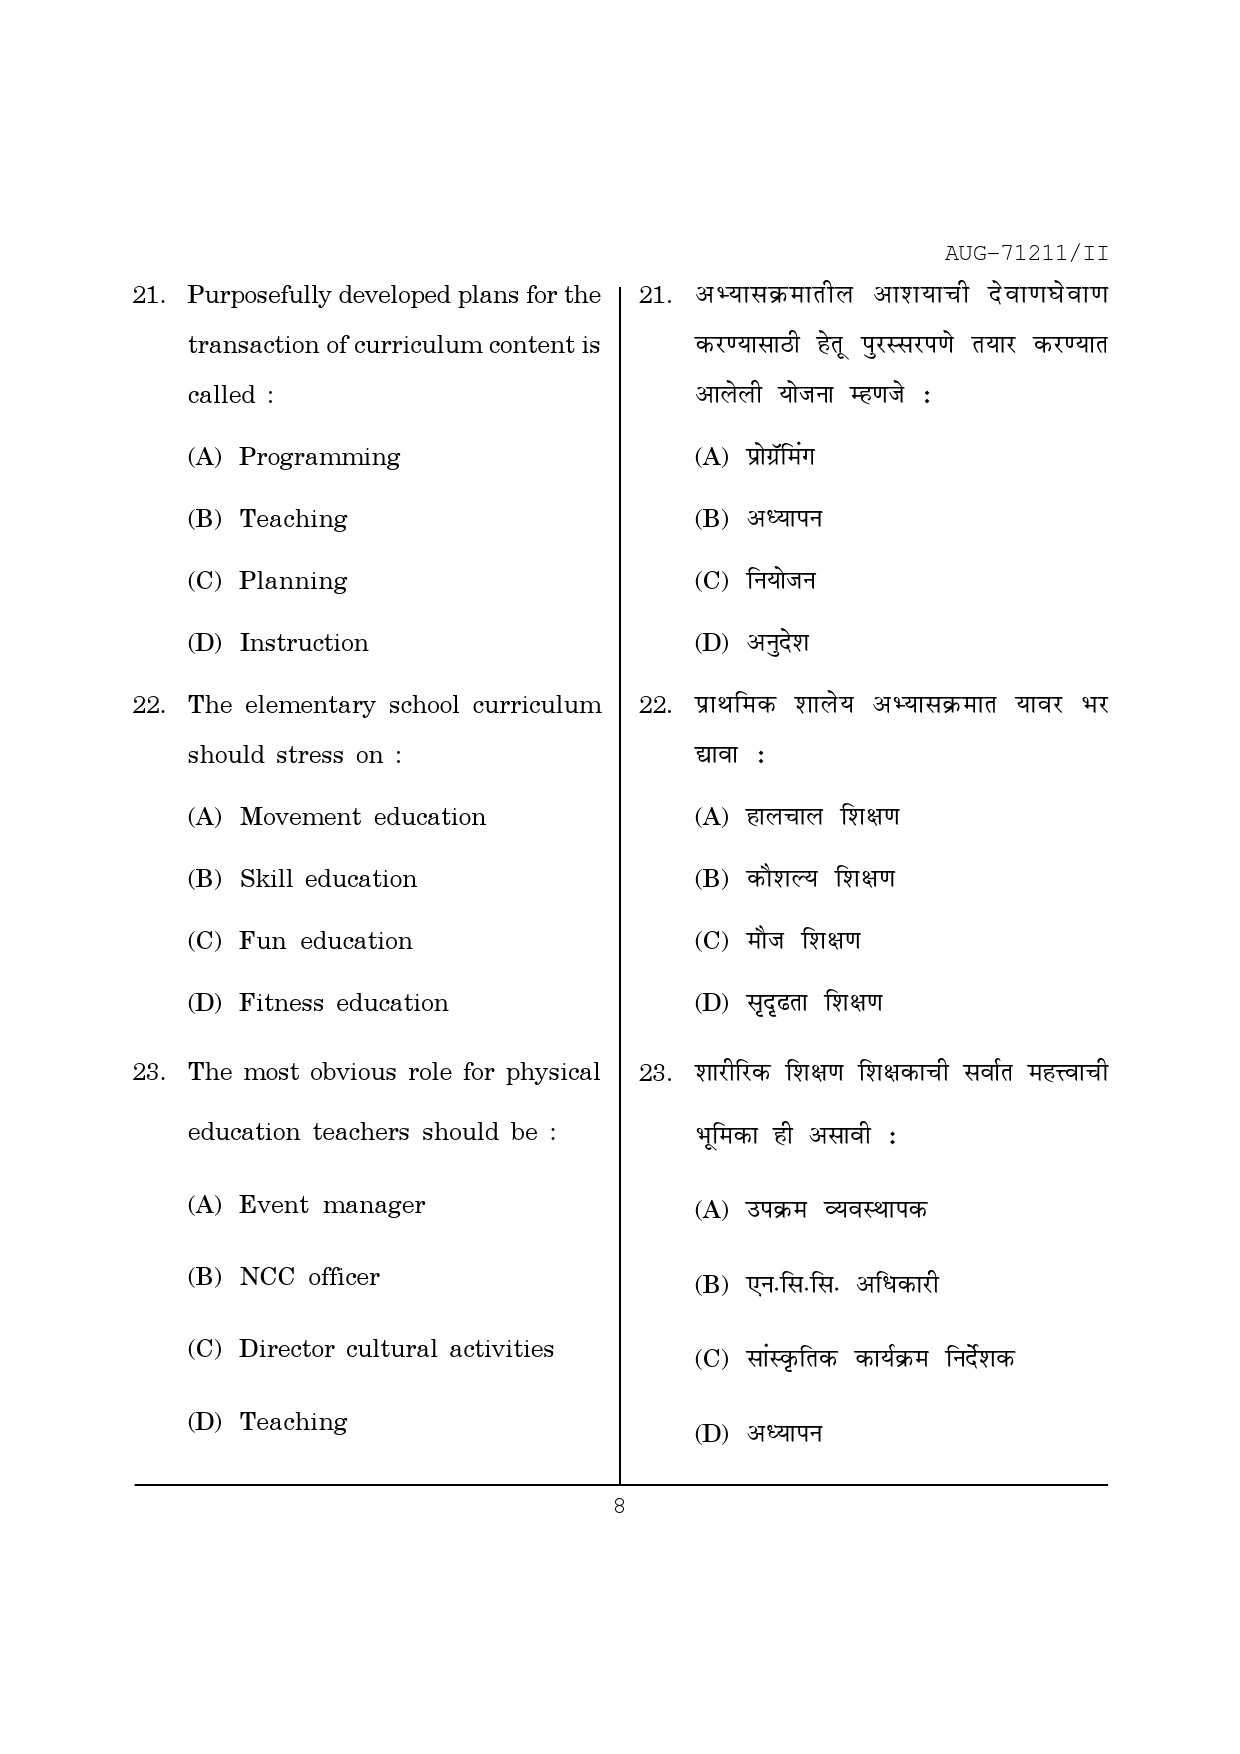 Maharashtra SET Physical Education Question Paper II August 2011 8